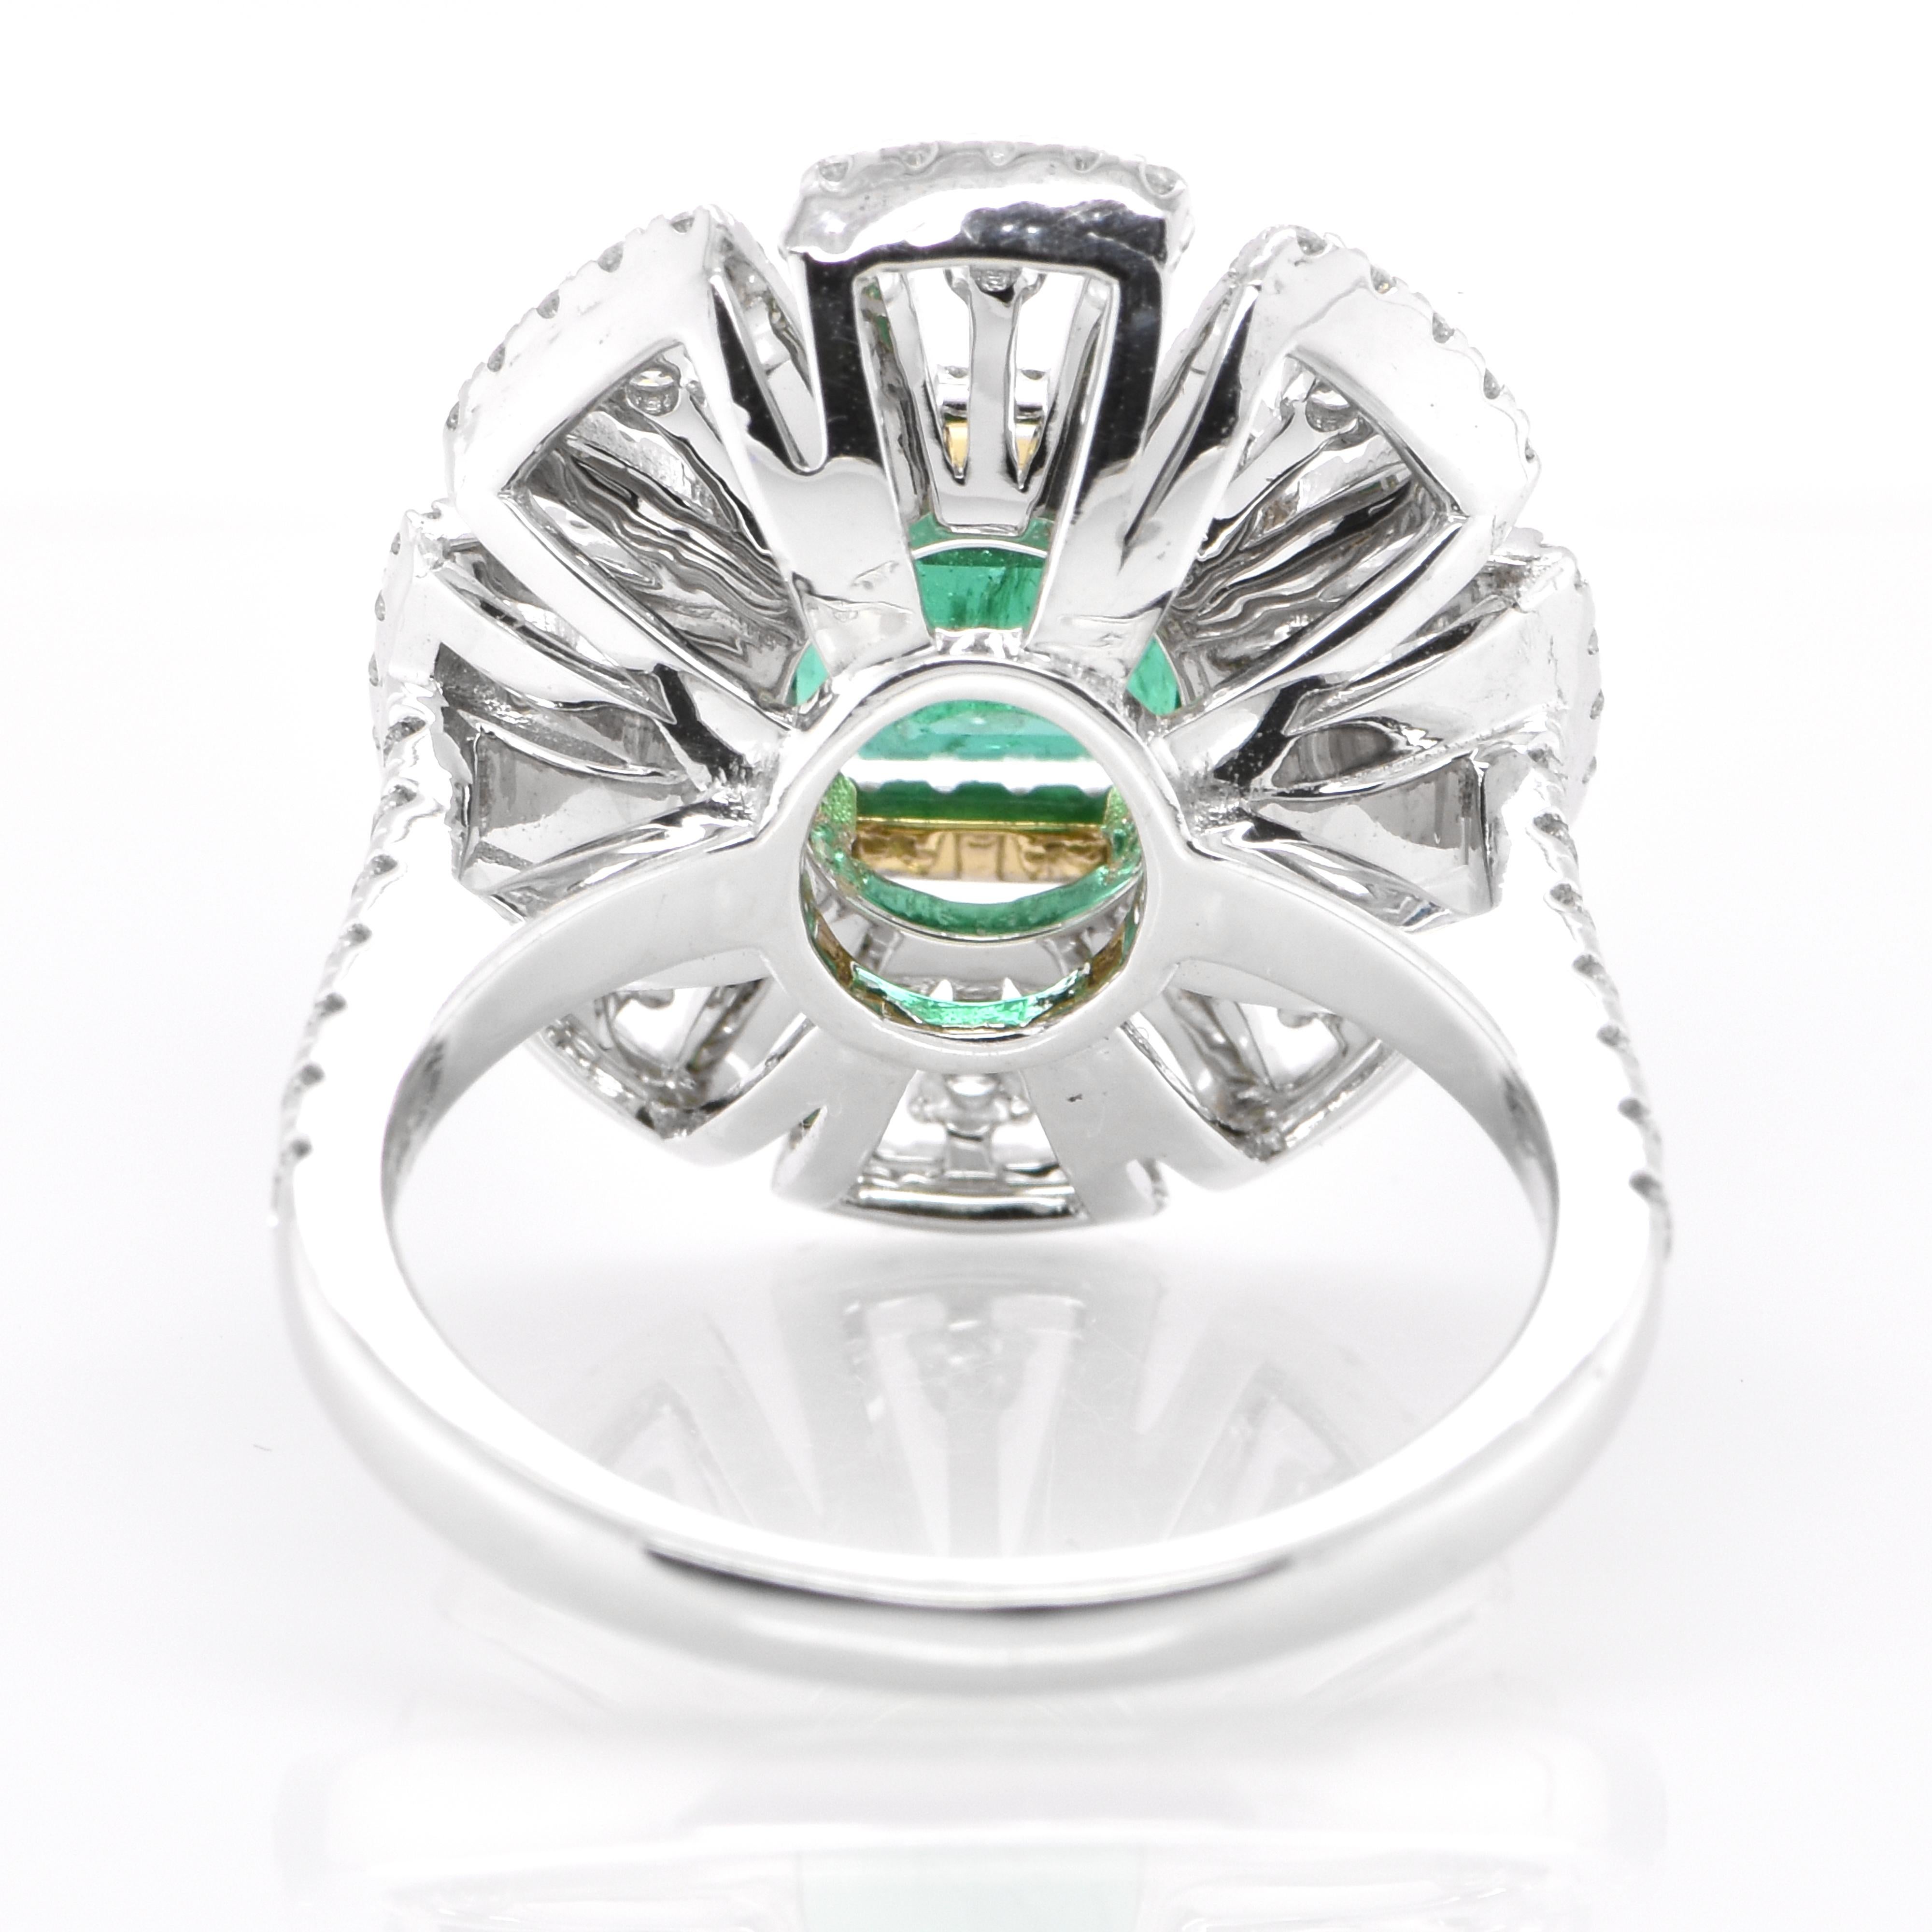 Women's 1.19 Carat Natural Emerald and Diamond Cocktail Ring Set in 18K White Gold For Sale